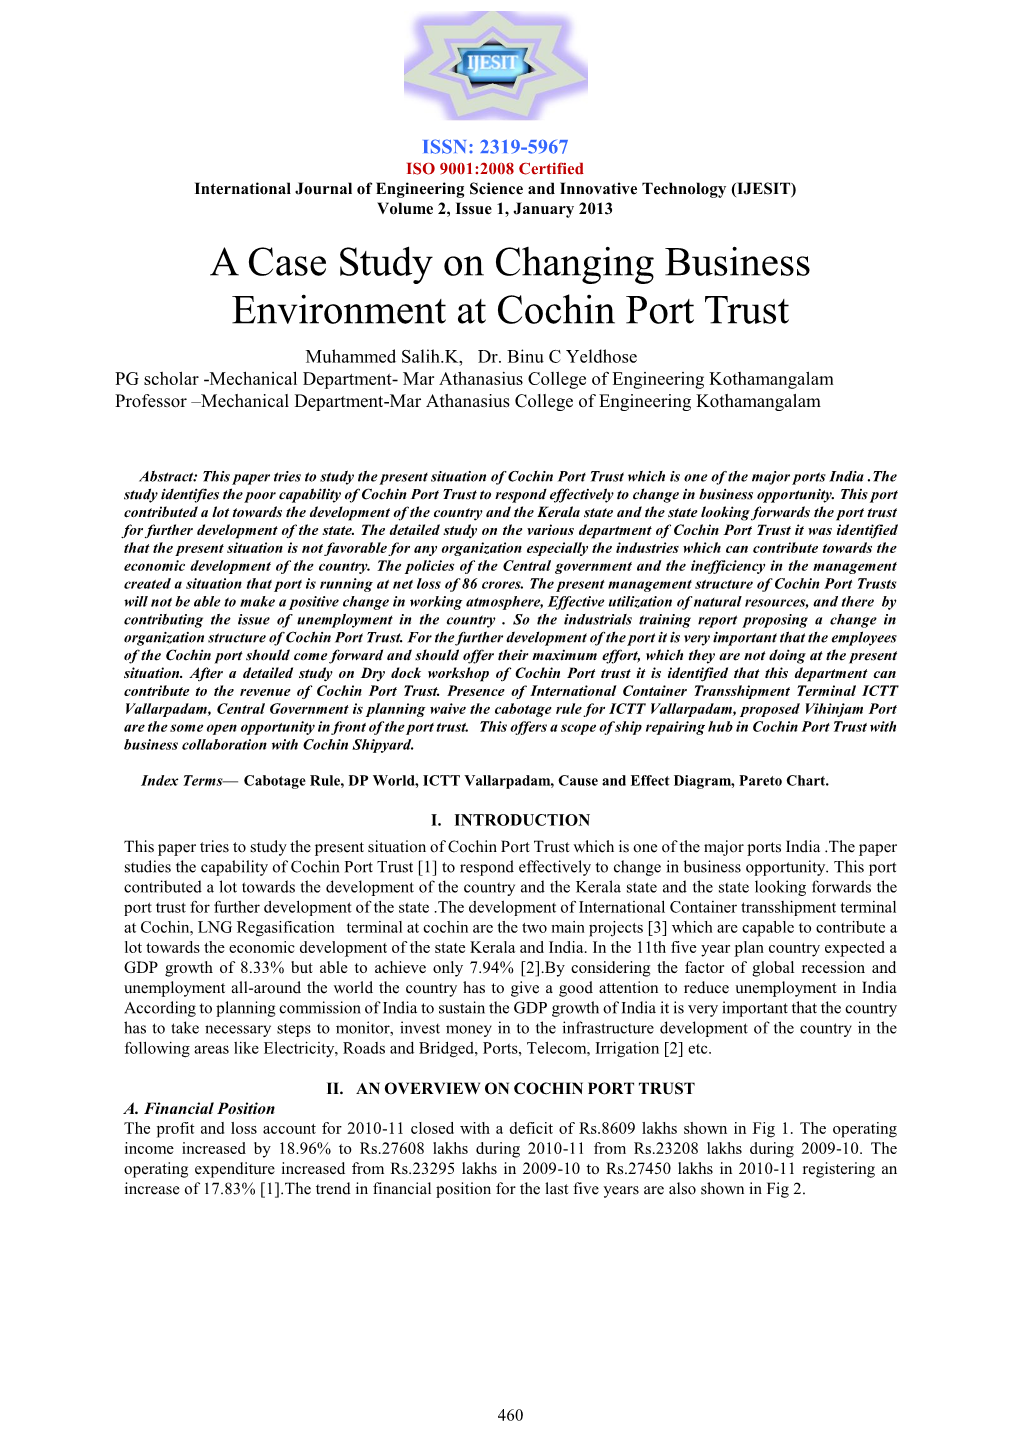 A Case Study on Changing Business Environment at Cochin Port Trust Muhammed Salih.K, Dr